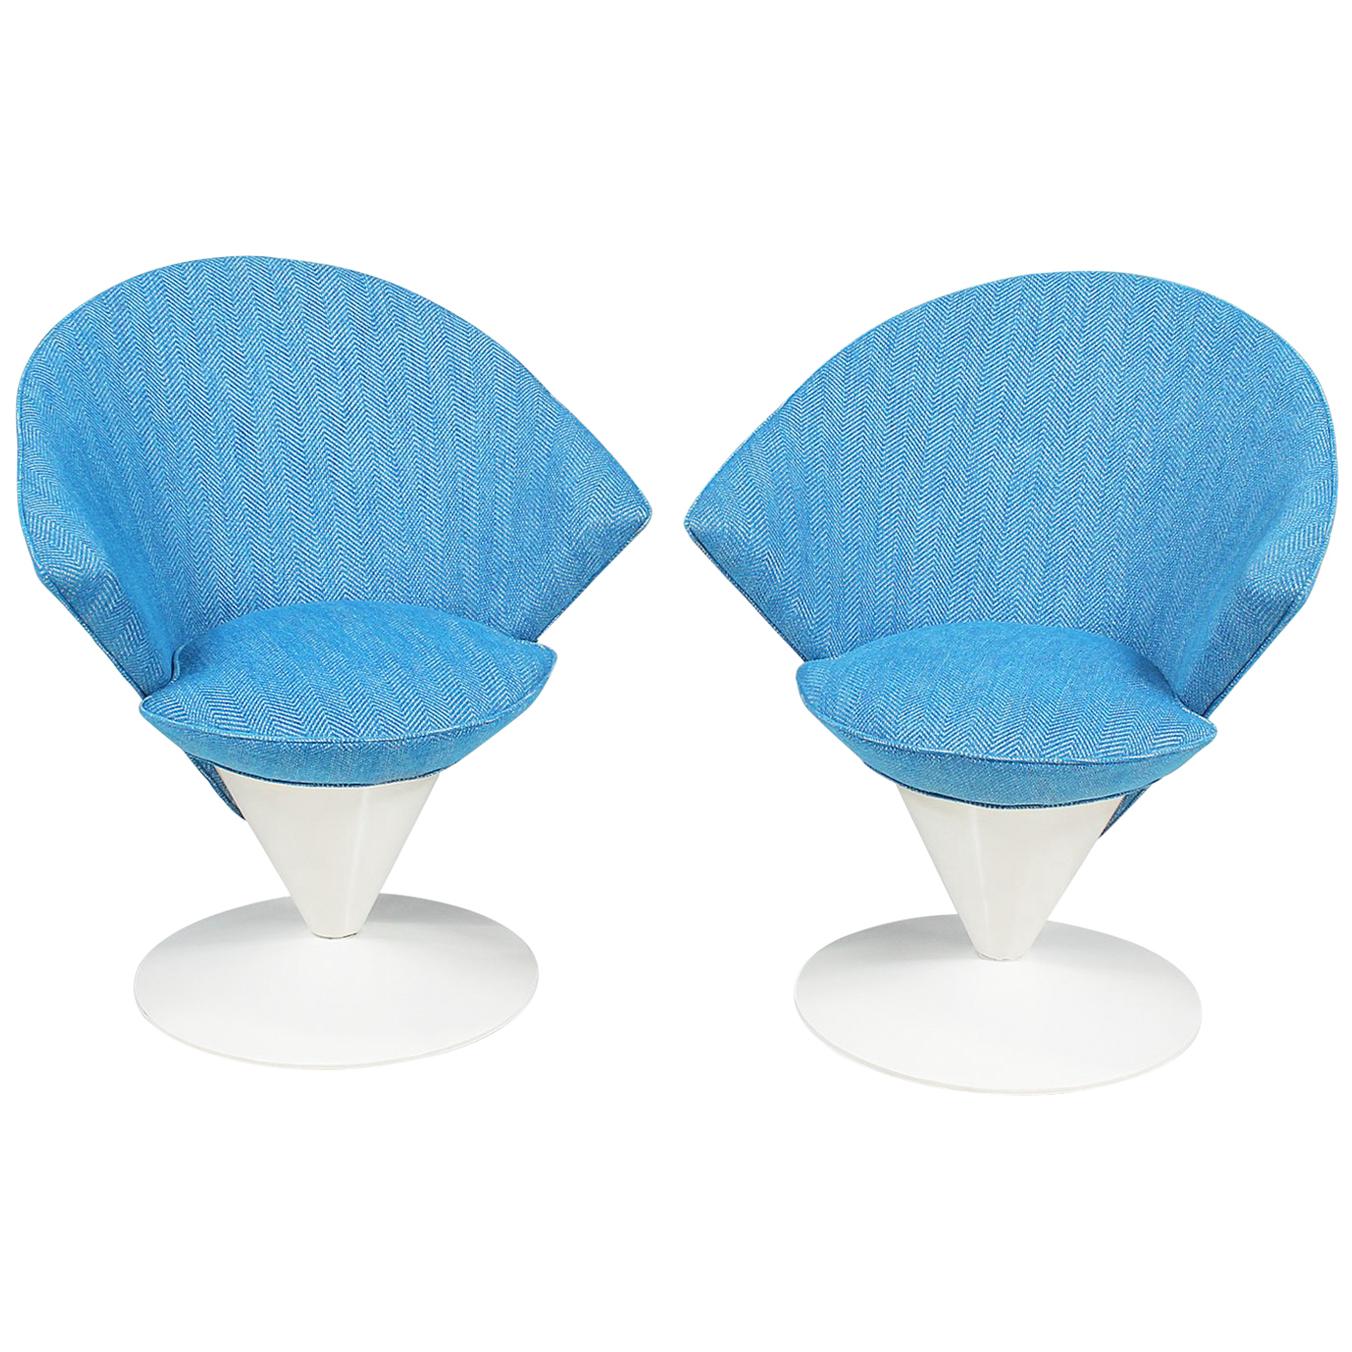 Adrian Pearsall Swivel “Cone” Chairs for Craft Associates